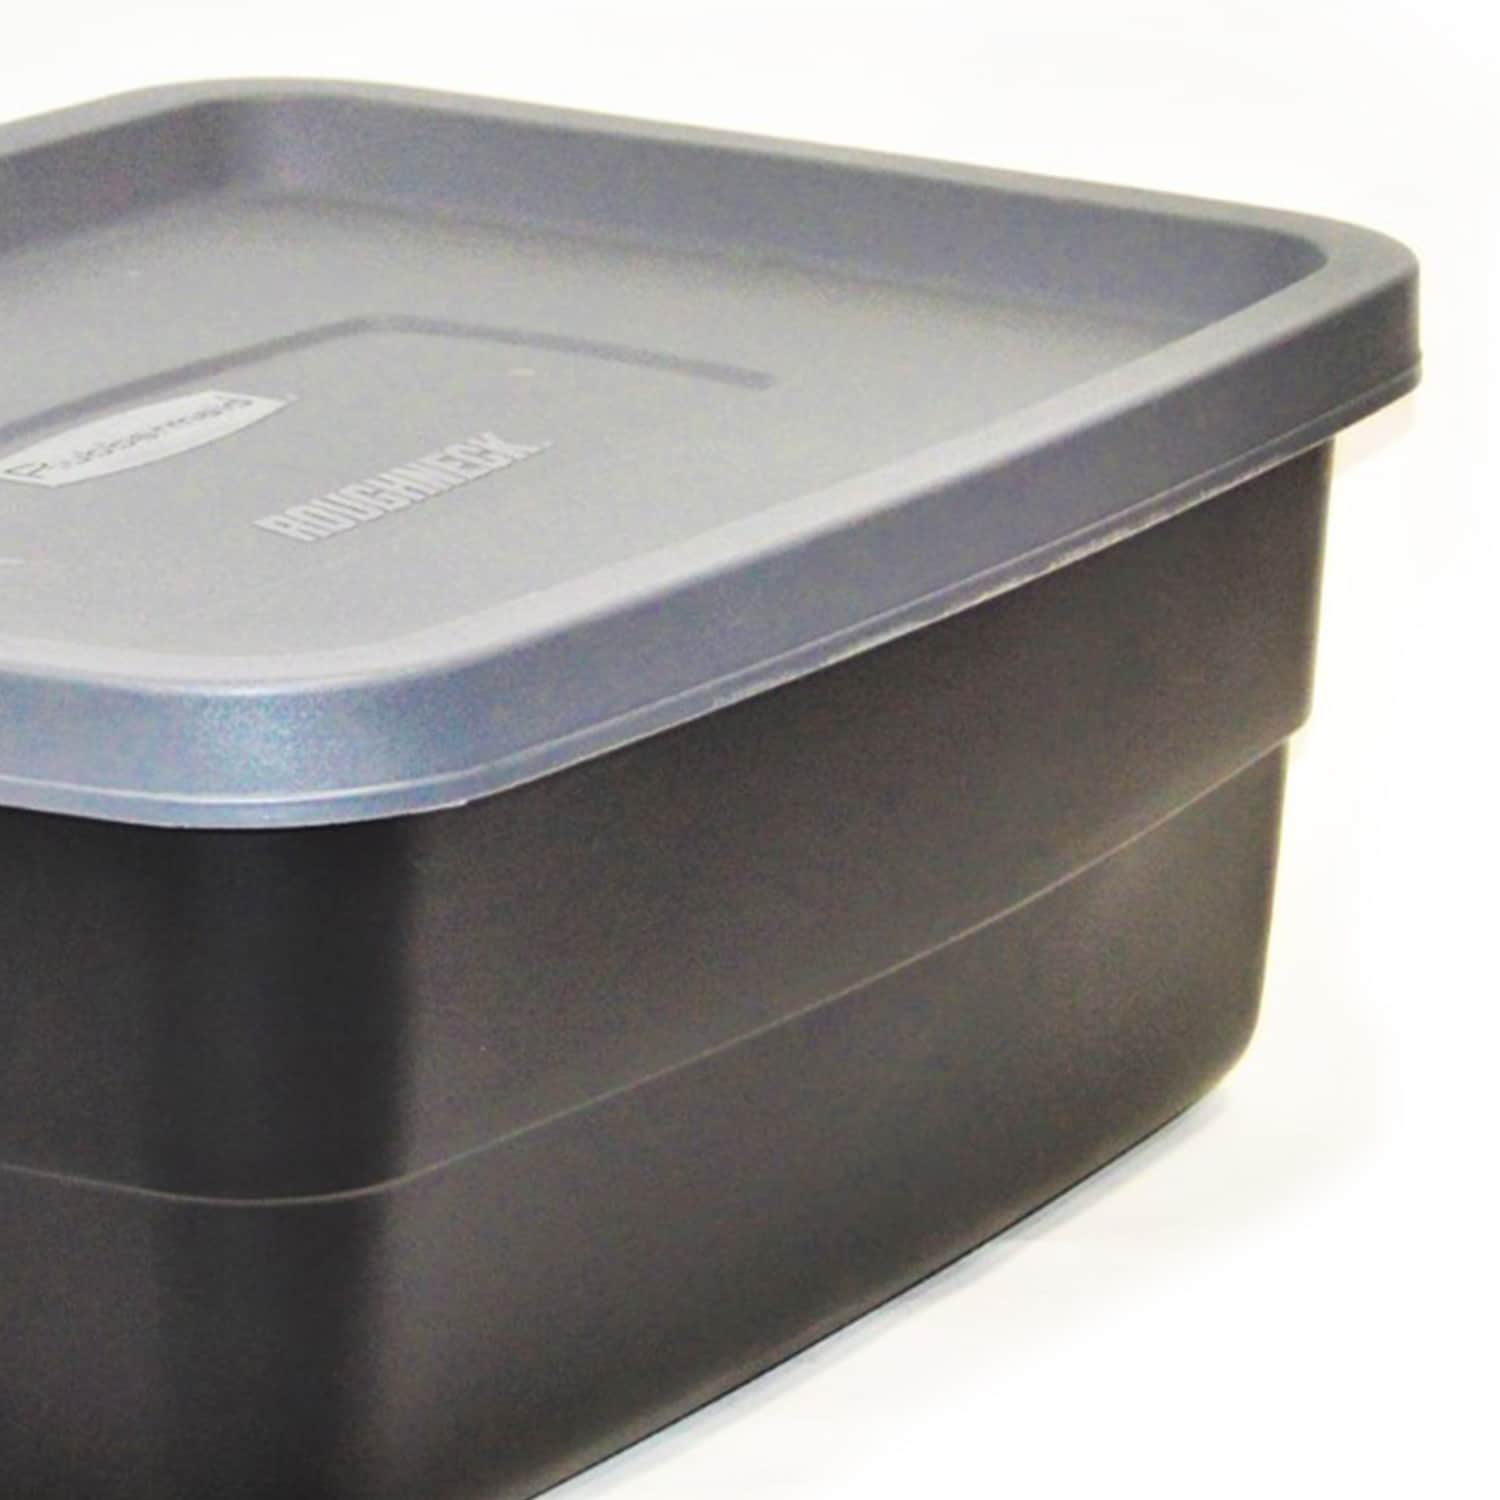 https://ak1.ostkcdn.com/images/products/is/images/direct/78f796ca5a1195c0a3d158d69ecaa798e234c270/Rubbermaid-Roughneck-Tote-10-Gallon-Storage-Container%2C-Black-Cool-Gray-%286-Pack%29.jpg